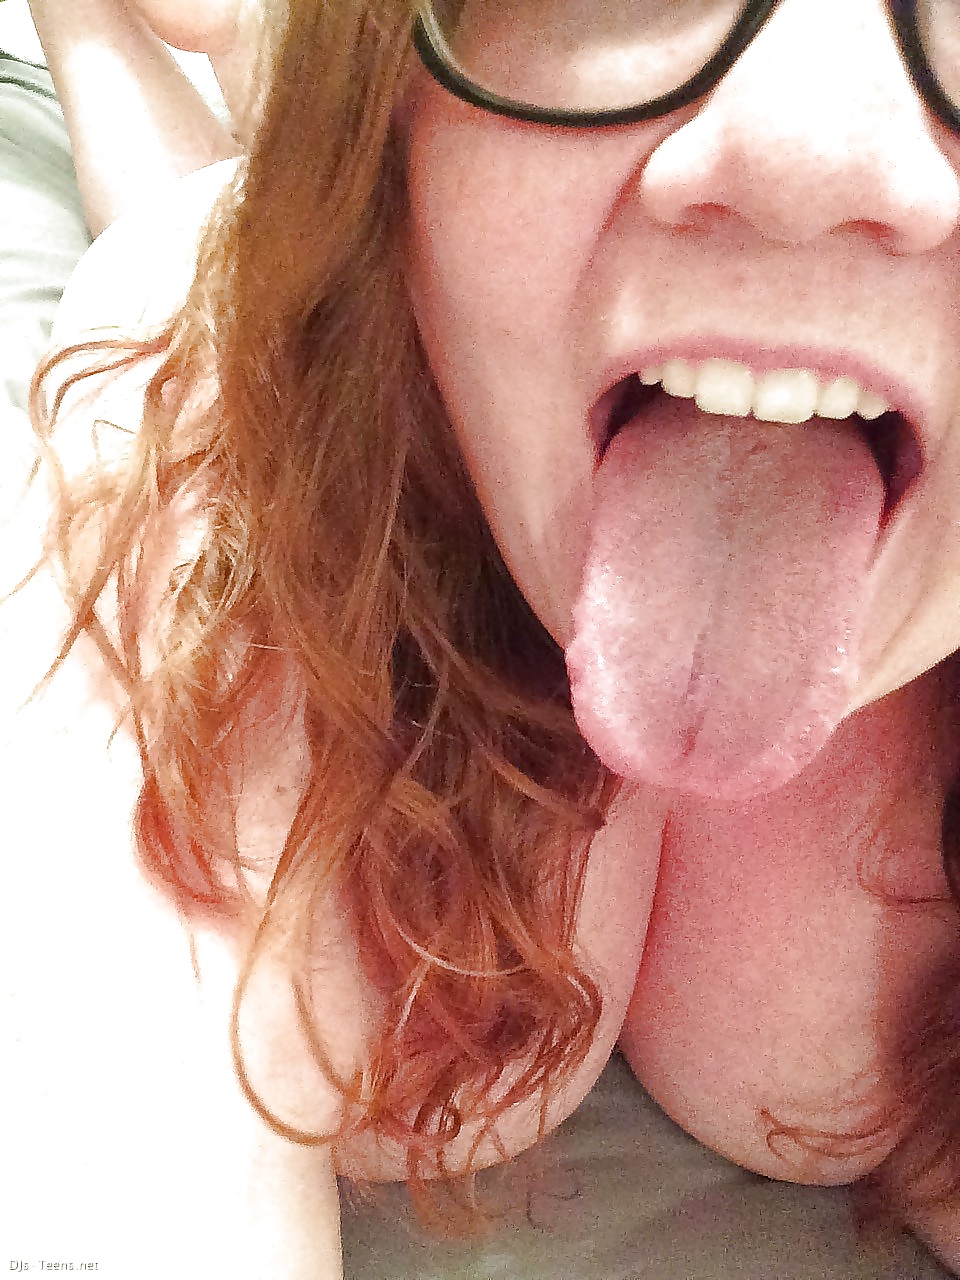 Tongue out naked girl